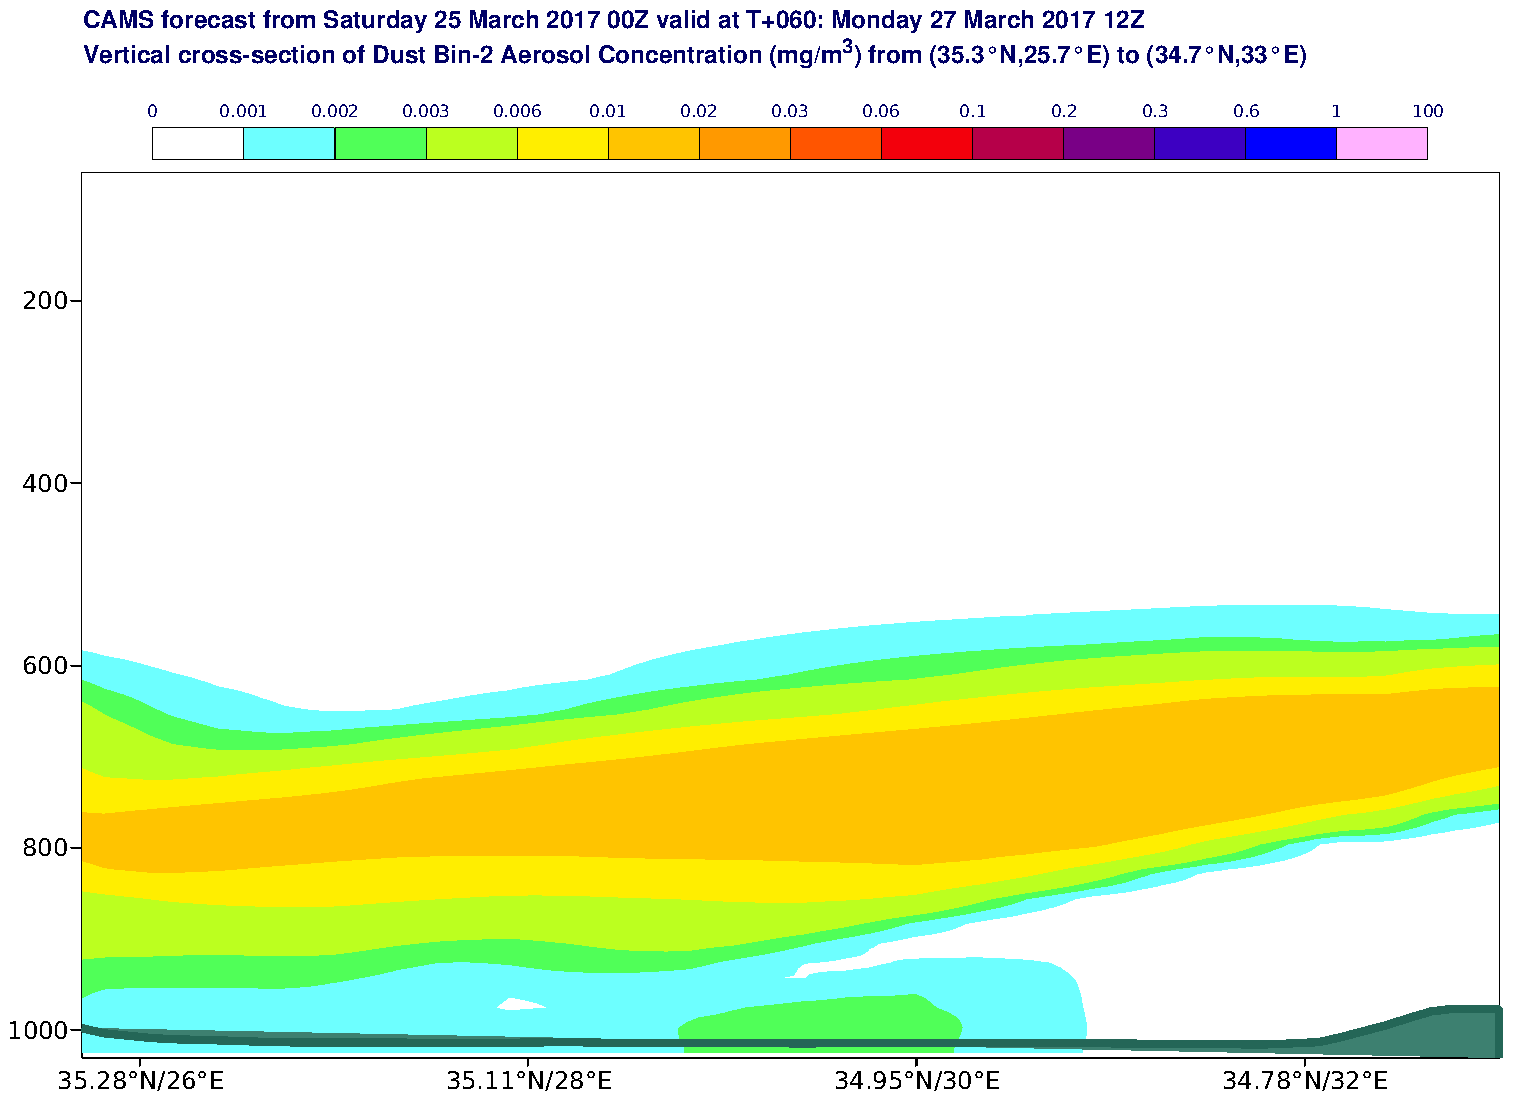 Vertical cross-section of Dust Bin-2 Aerosol Concentration (mg/m3) valid at T60 - 2017-03-27 12:00